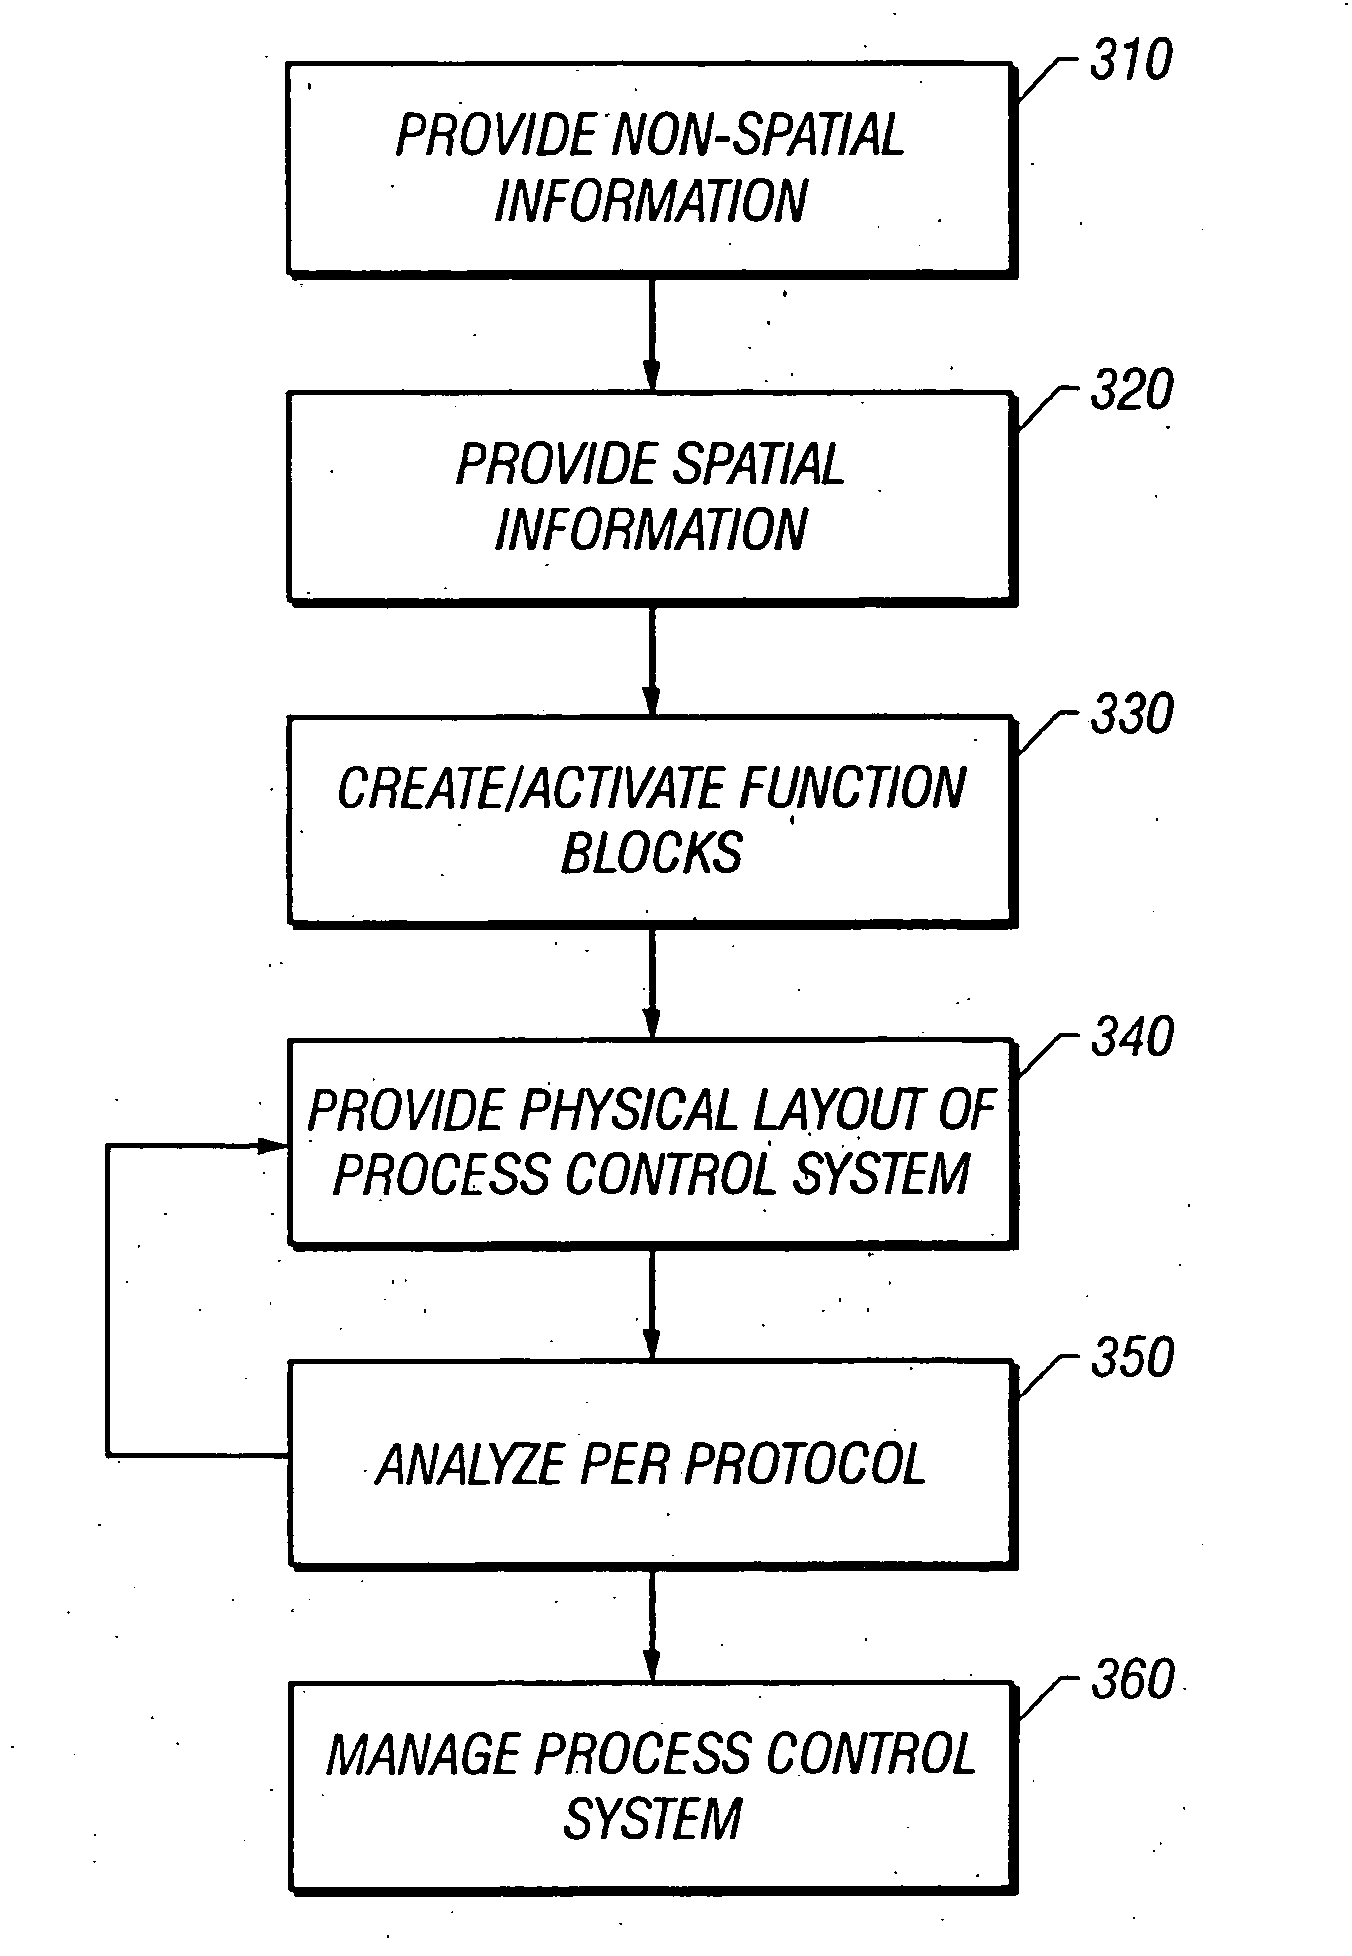 Tool for configuring and managing a process control network including the use of spatial information